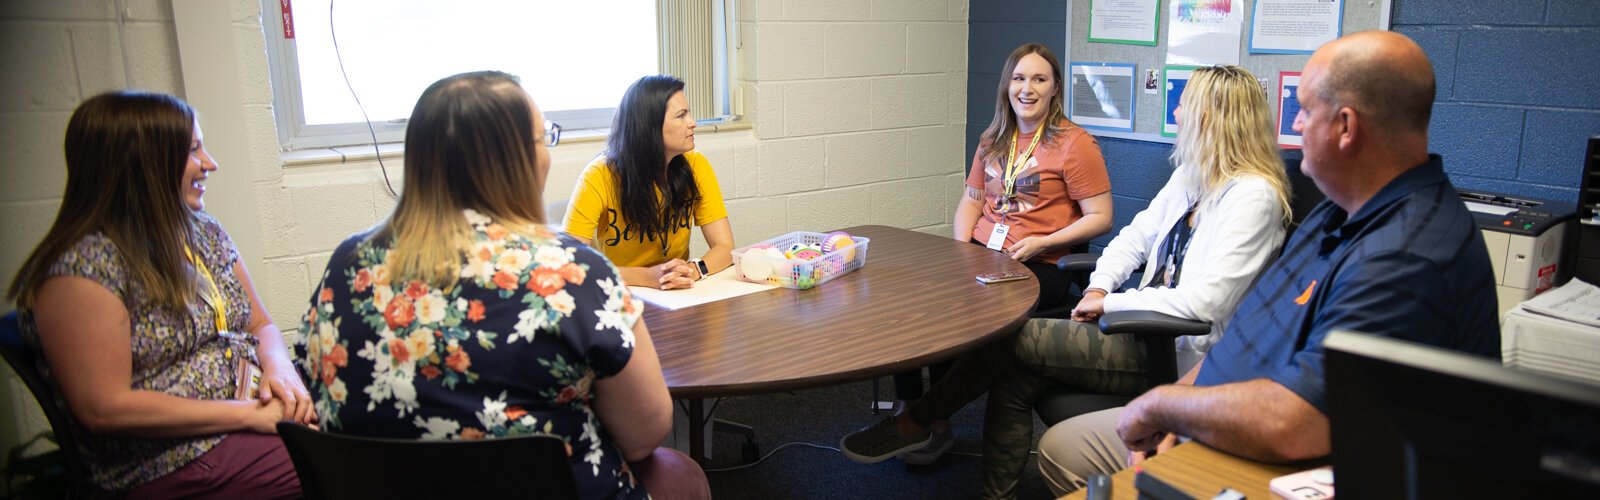 Airport Community Schools staff including Supt. John Krimmel (far right) confer with Family Medical Center staff including School Based Services Supervisor Meredith Gilliam (far left) and Behavioral Health Therapist Alexis Cavins (in orange shirt). 